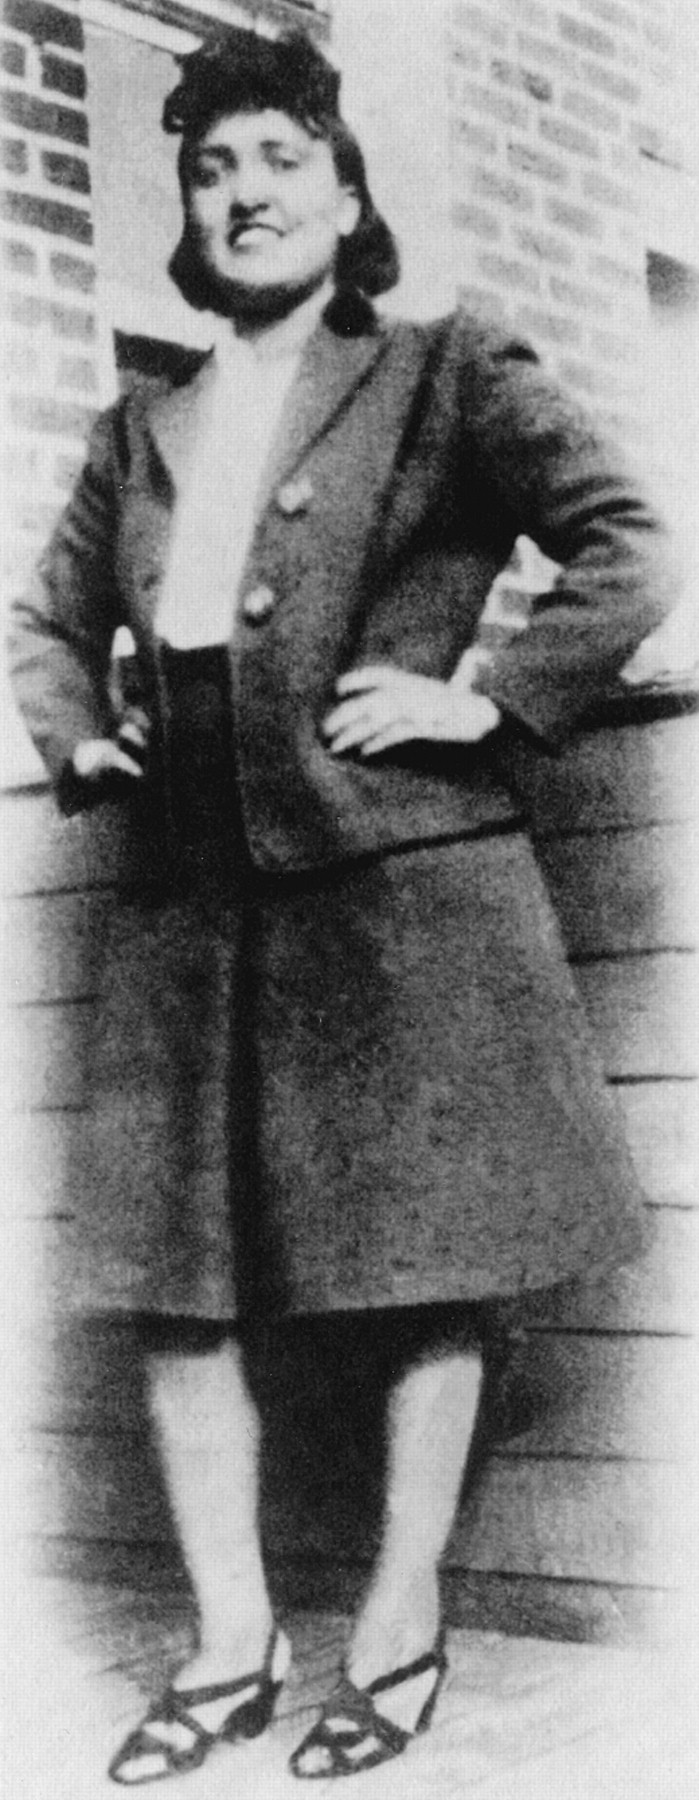 Image shows a black and white photograph of a woman smiling, with her hands on her hips. She is African American, and dressed in the style of the 1940s in a skirt and blazer.